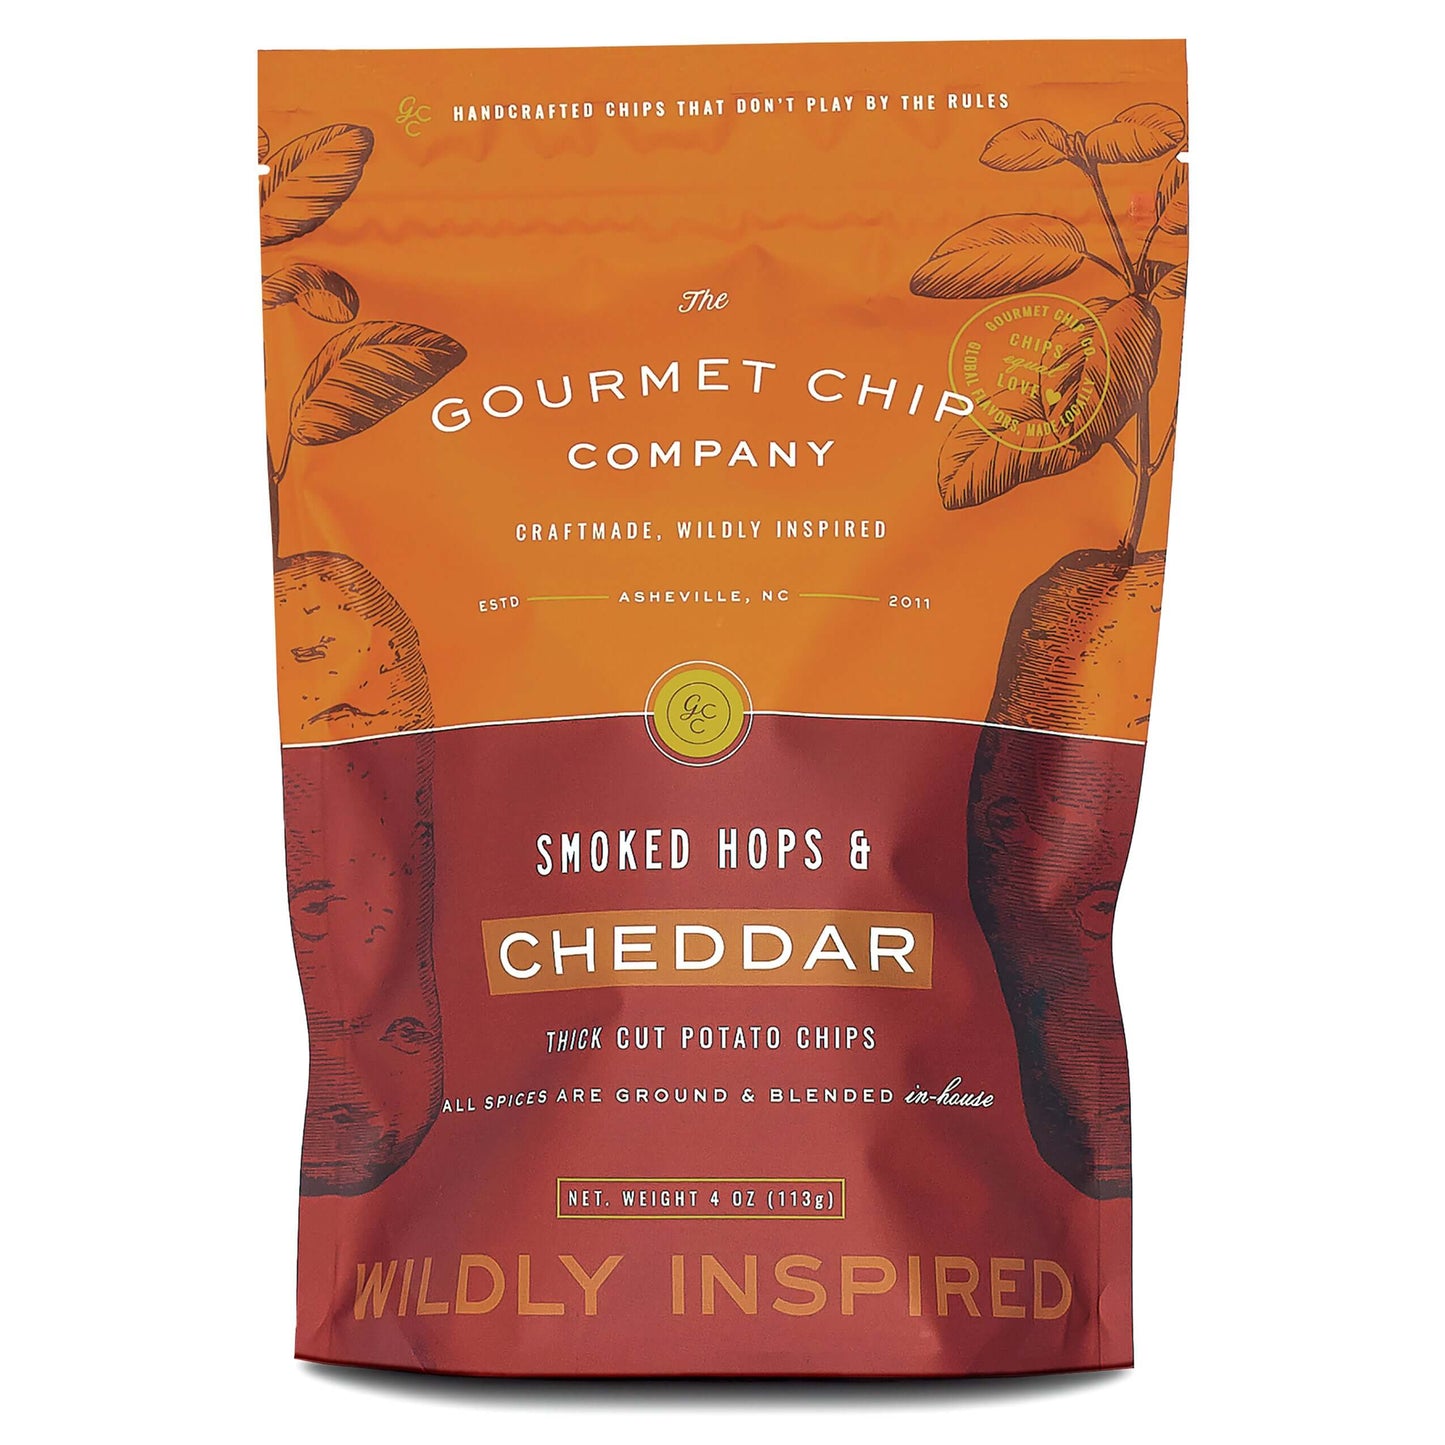 Smoked Hops & Cheddar Thick Cut Potato Chips